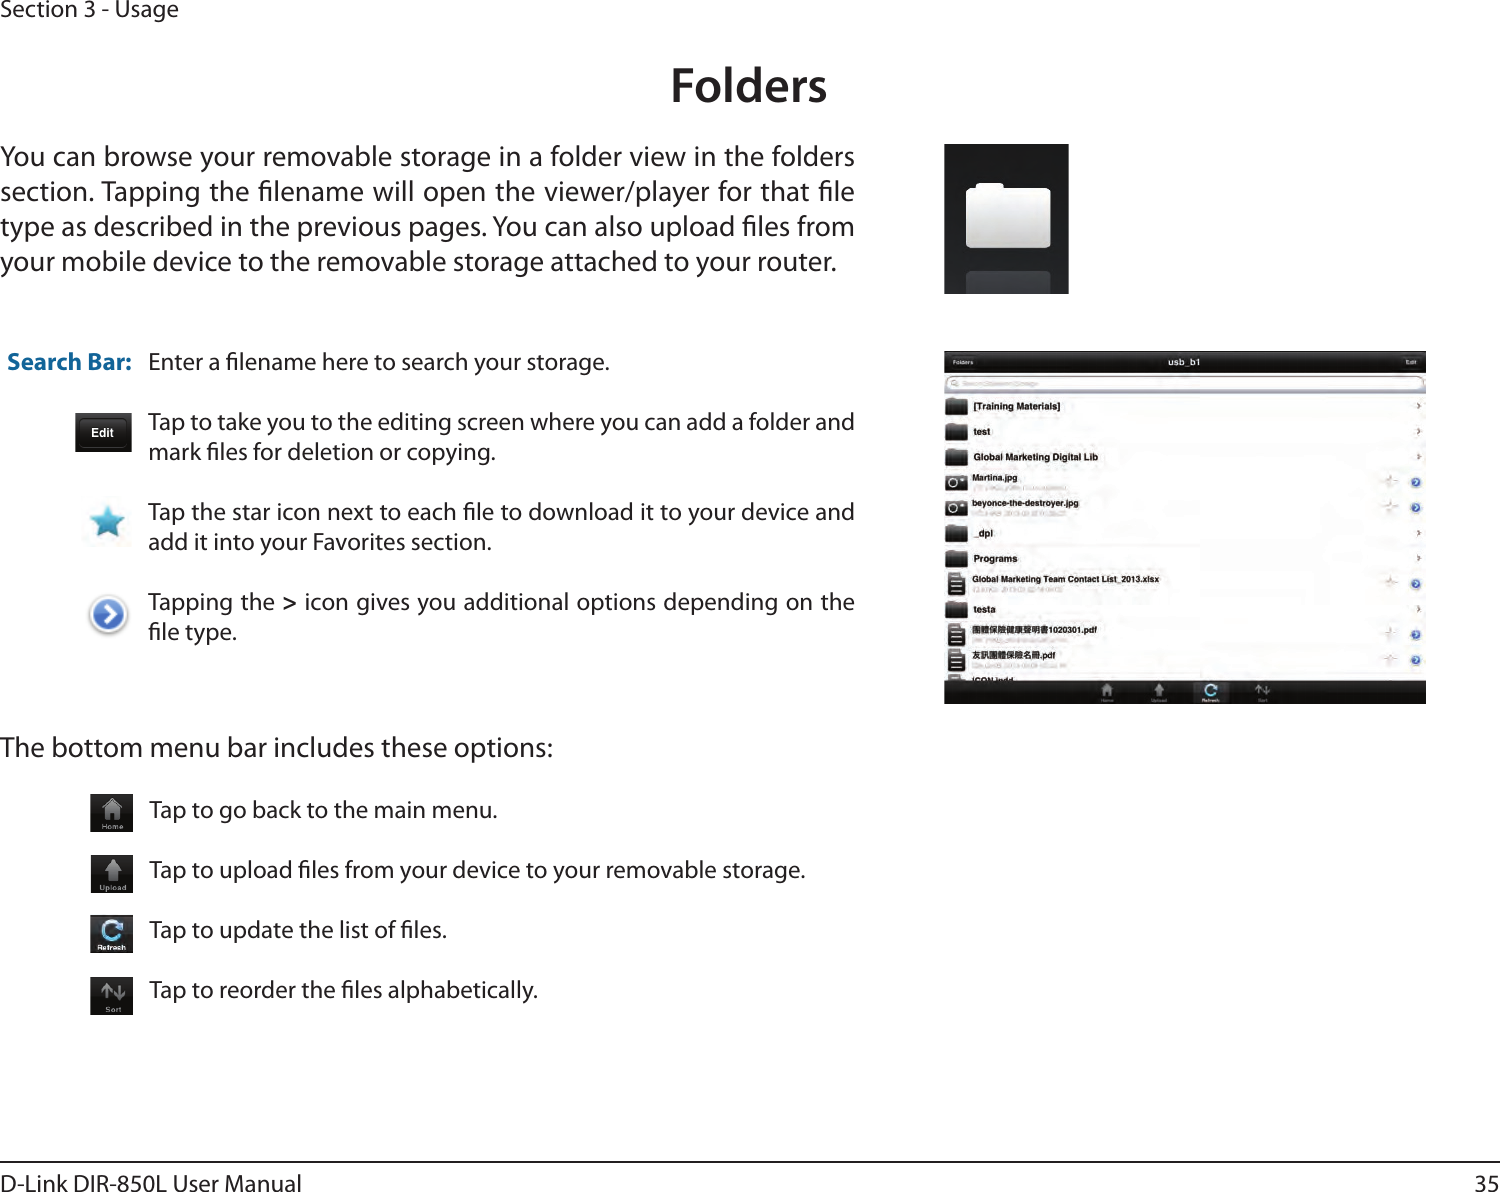 35D-Link DIR-850L User ManualSection 3 - UsageFoldersYou can browse your removable storage in a folder view in the folders section. Tapping the lename will open the viewer/player for that le type as described in the previous pages. You can also upload les from your mobile device to the removable storage attached to your router.Enter a lename here to search your storage.Tap to take you to the editing screen where you can add a folder and mark les for deletion or copying.Tap the star icon next to each le to download it to your device and add it into your Favorites section.Tapping the &gt; icon gives you additional options depending on the le type.Search Bar:The bottom menu bar includes these options:Tap to go back to the main menu.Tap to upload les from your device to your removable storage.Tap to update the list of les.Tap to reorder the les alphabetically.